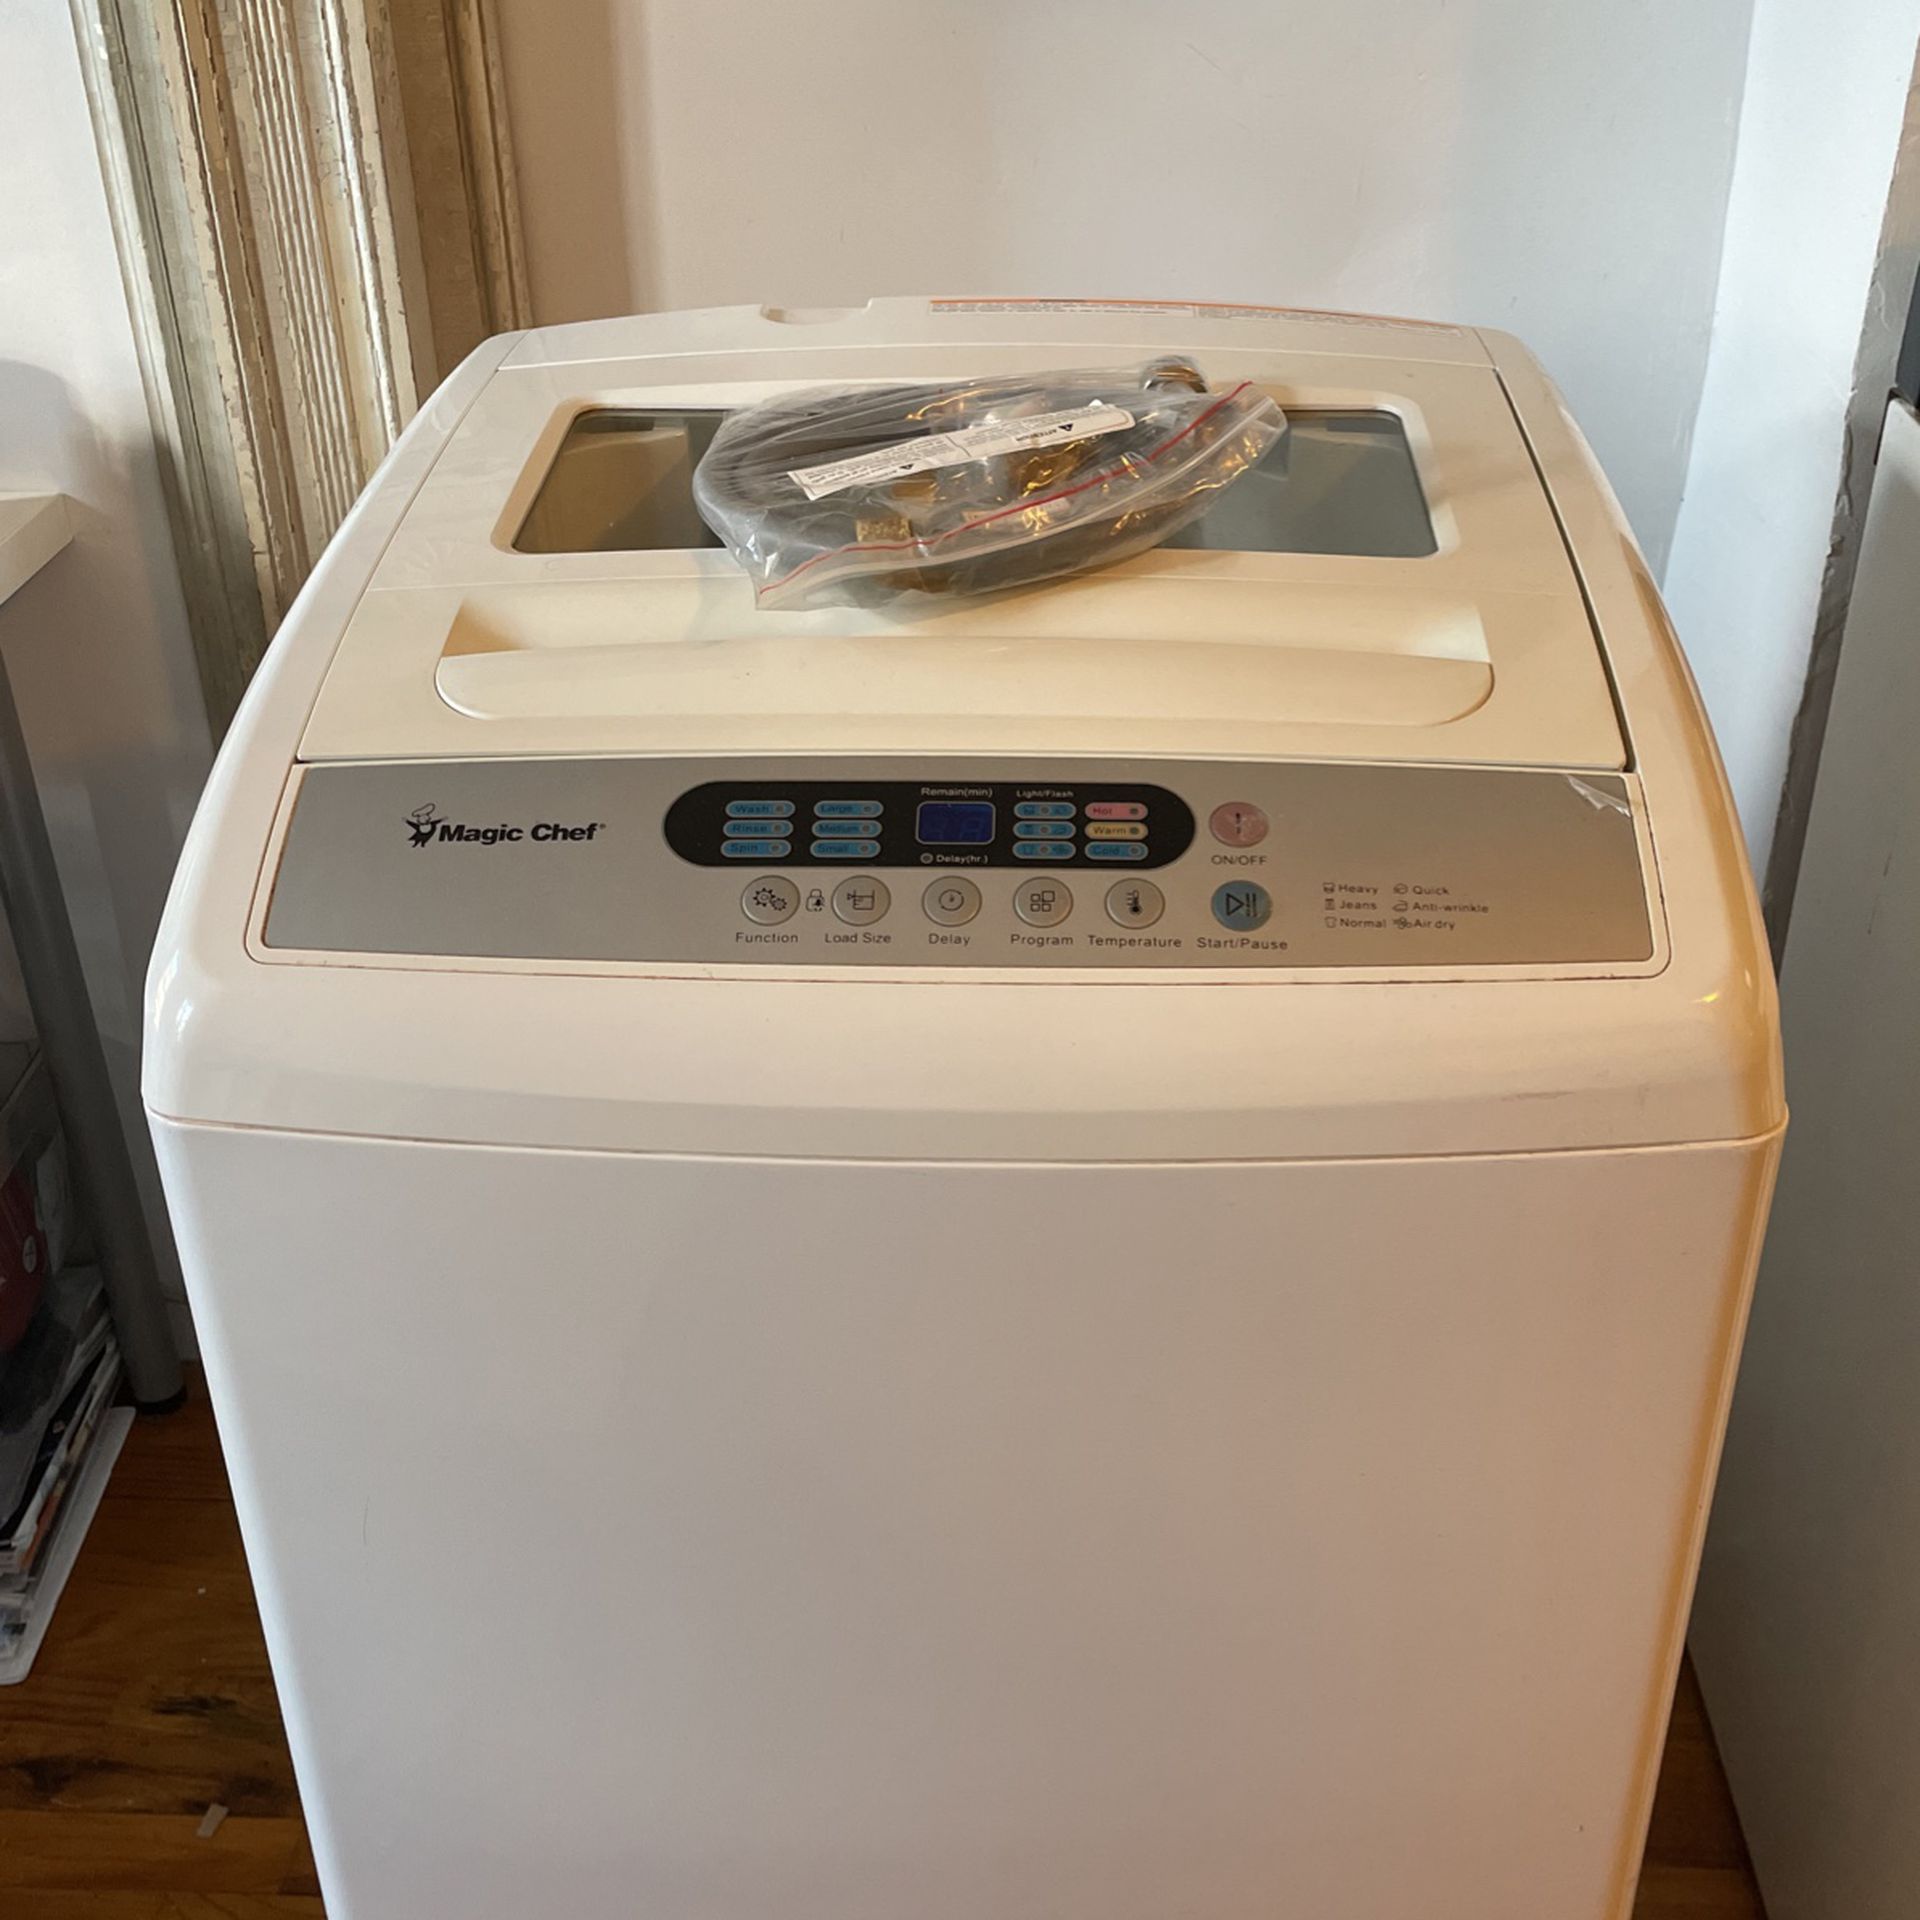 Magic Chef 2.1 cu ft Topload Compact Washer, White